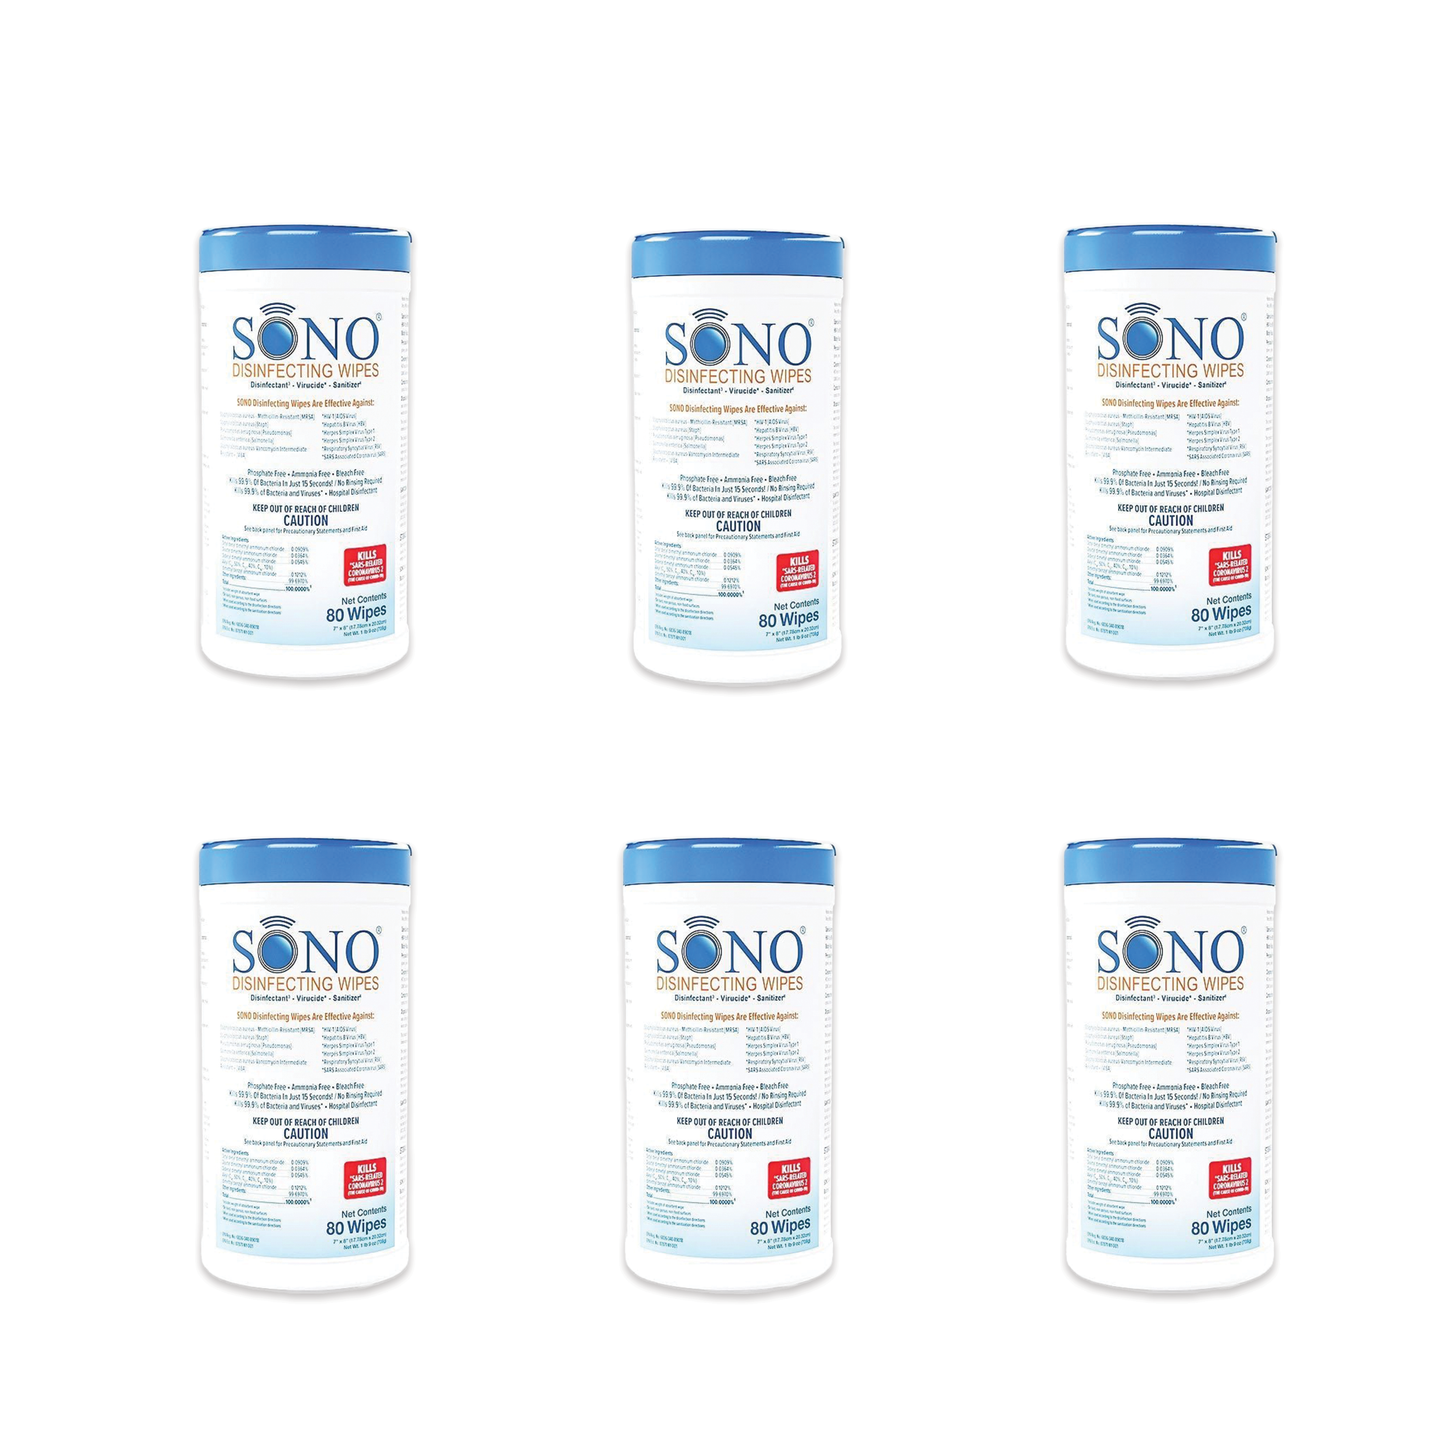 SONO Disinfecting Wipes - Canister - 80 ct (6 PACK)